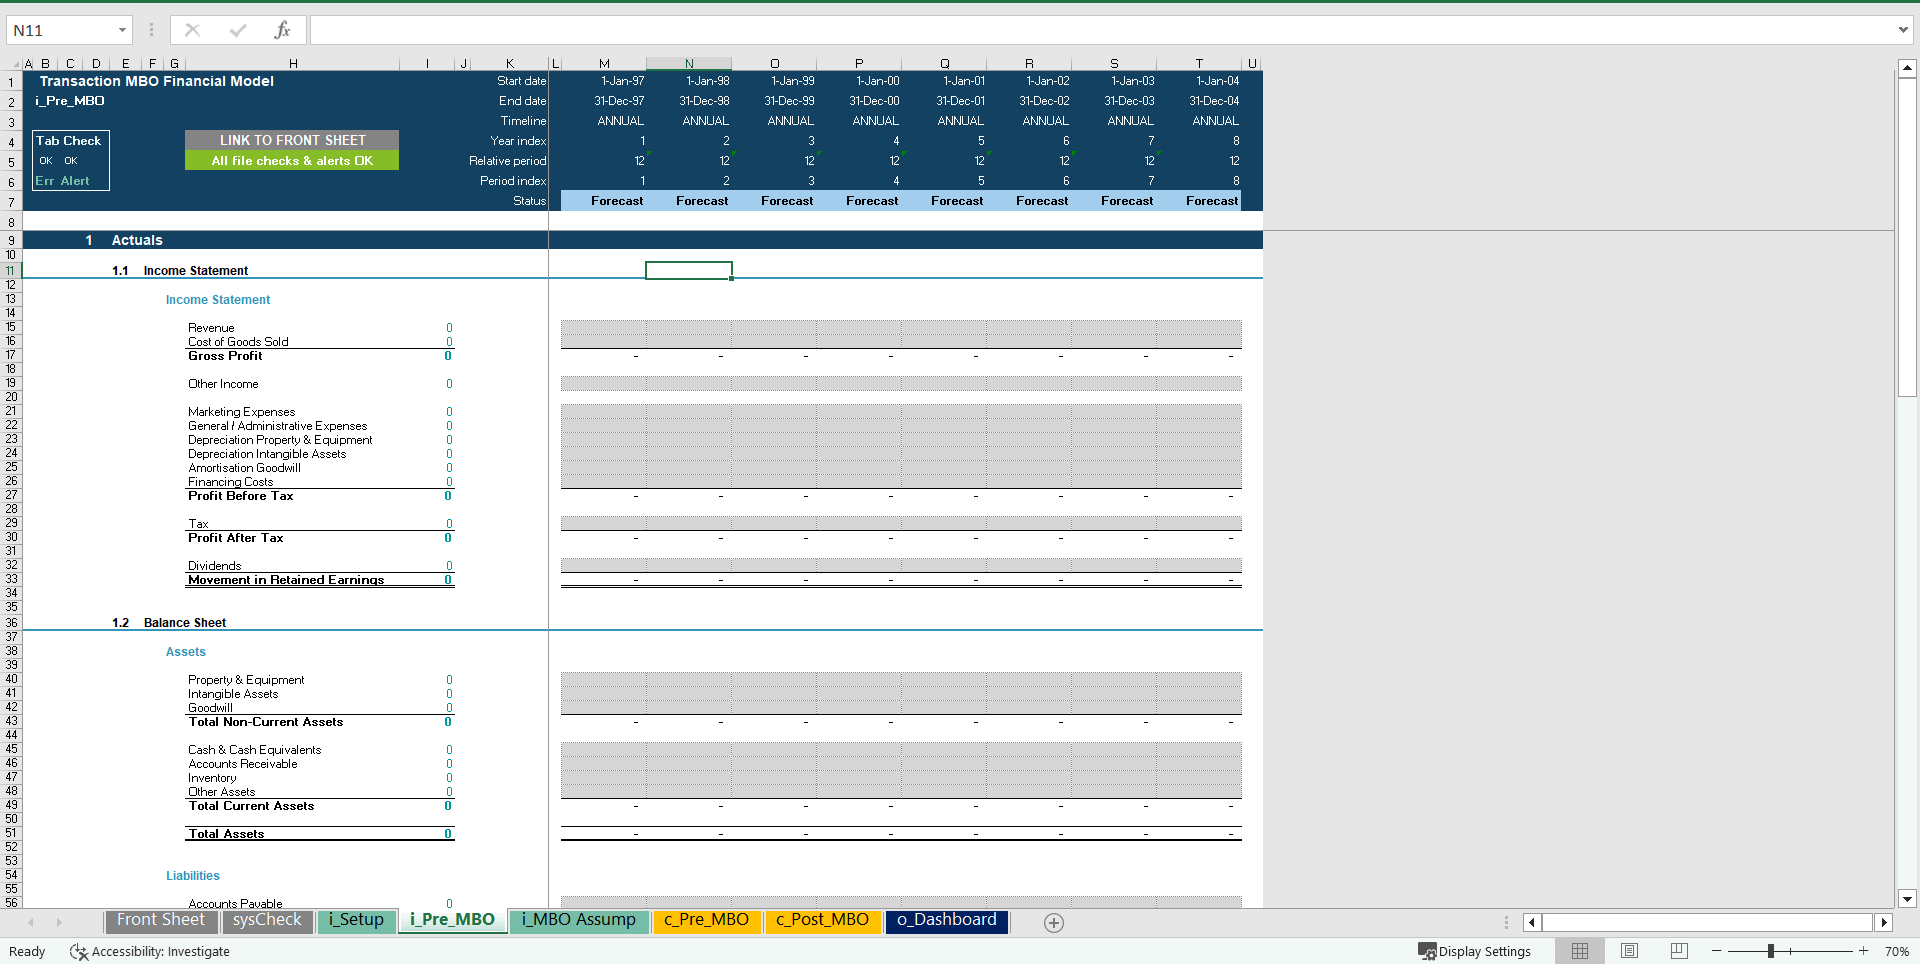 Management Buyout (MBO) Financial Projection Model (Excel template (XLSX)) Preview Image